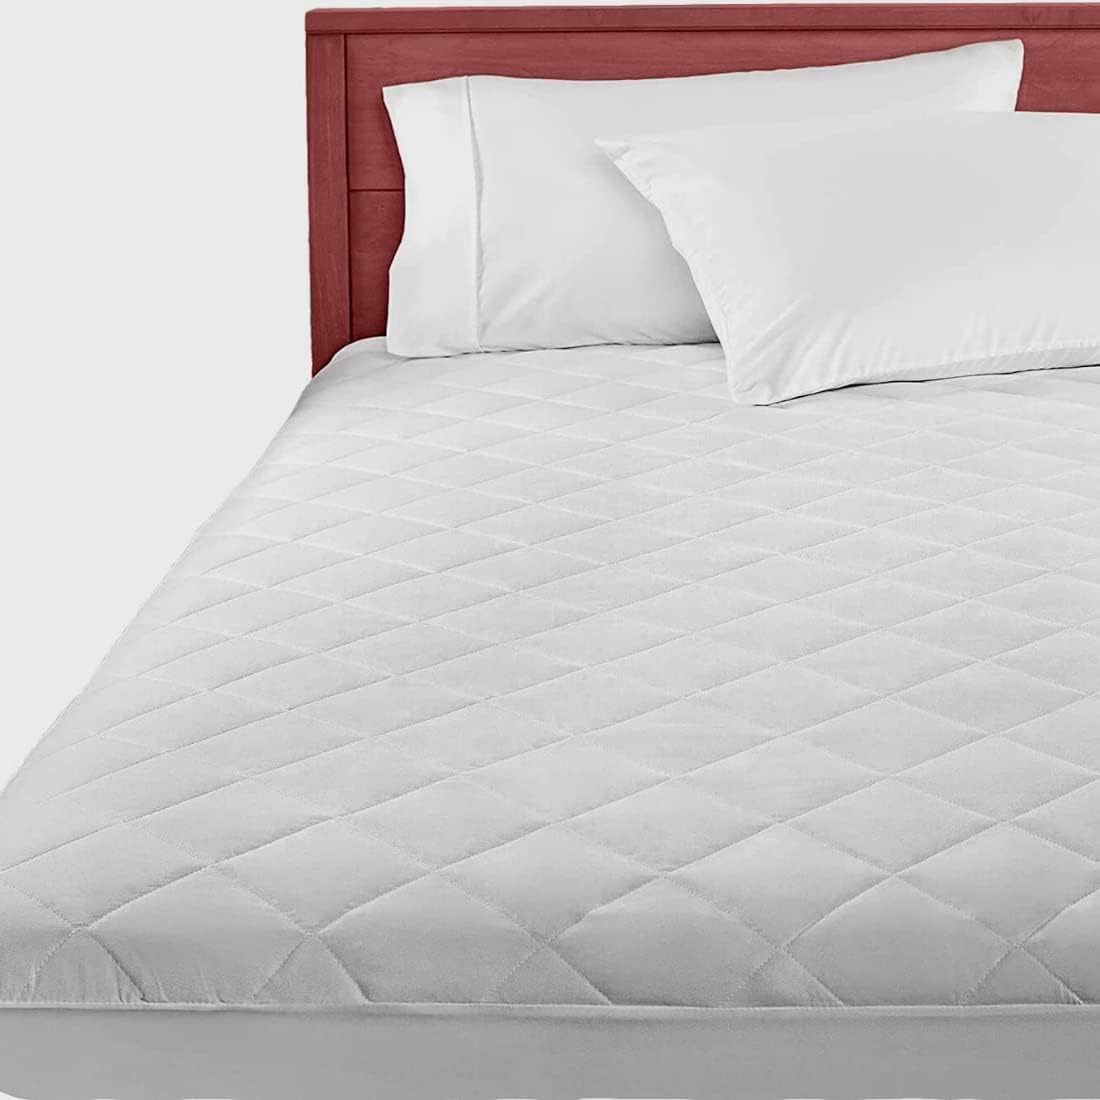 Luxury Quilted Extra Deep Mattress Protector, Hotel Quality Fitted Mattress